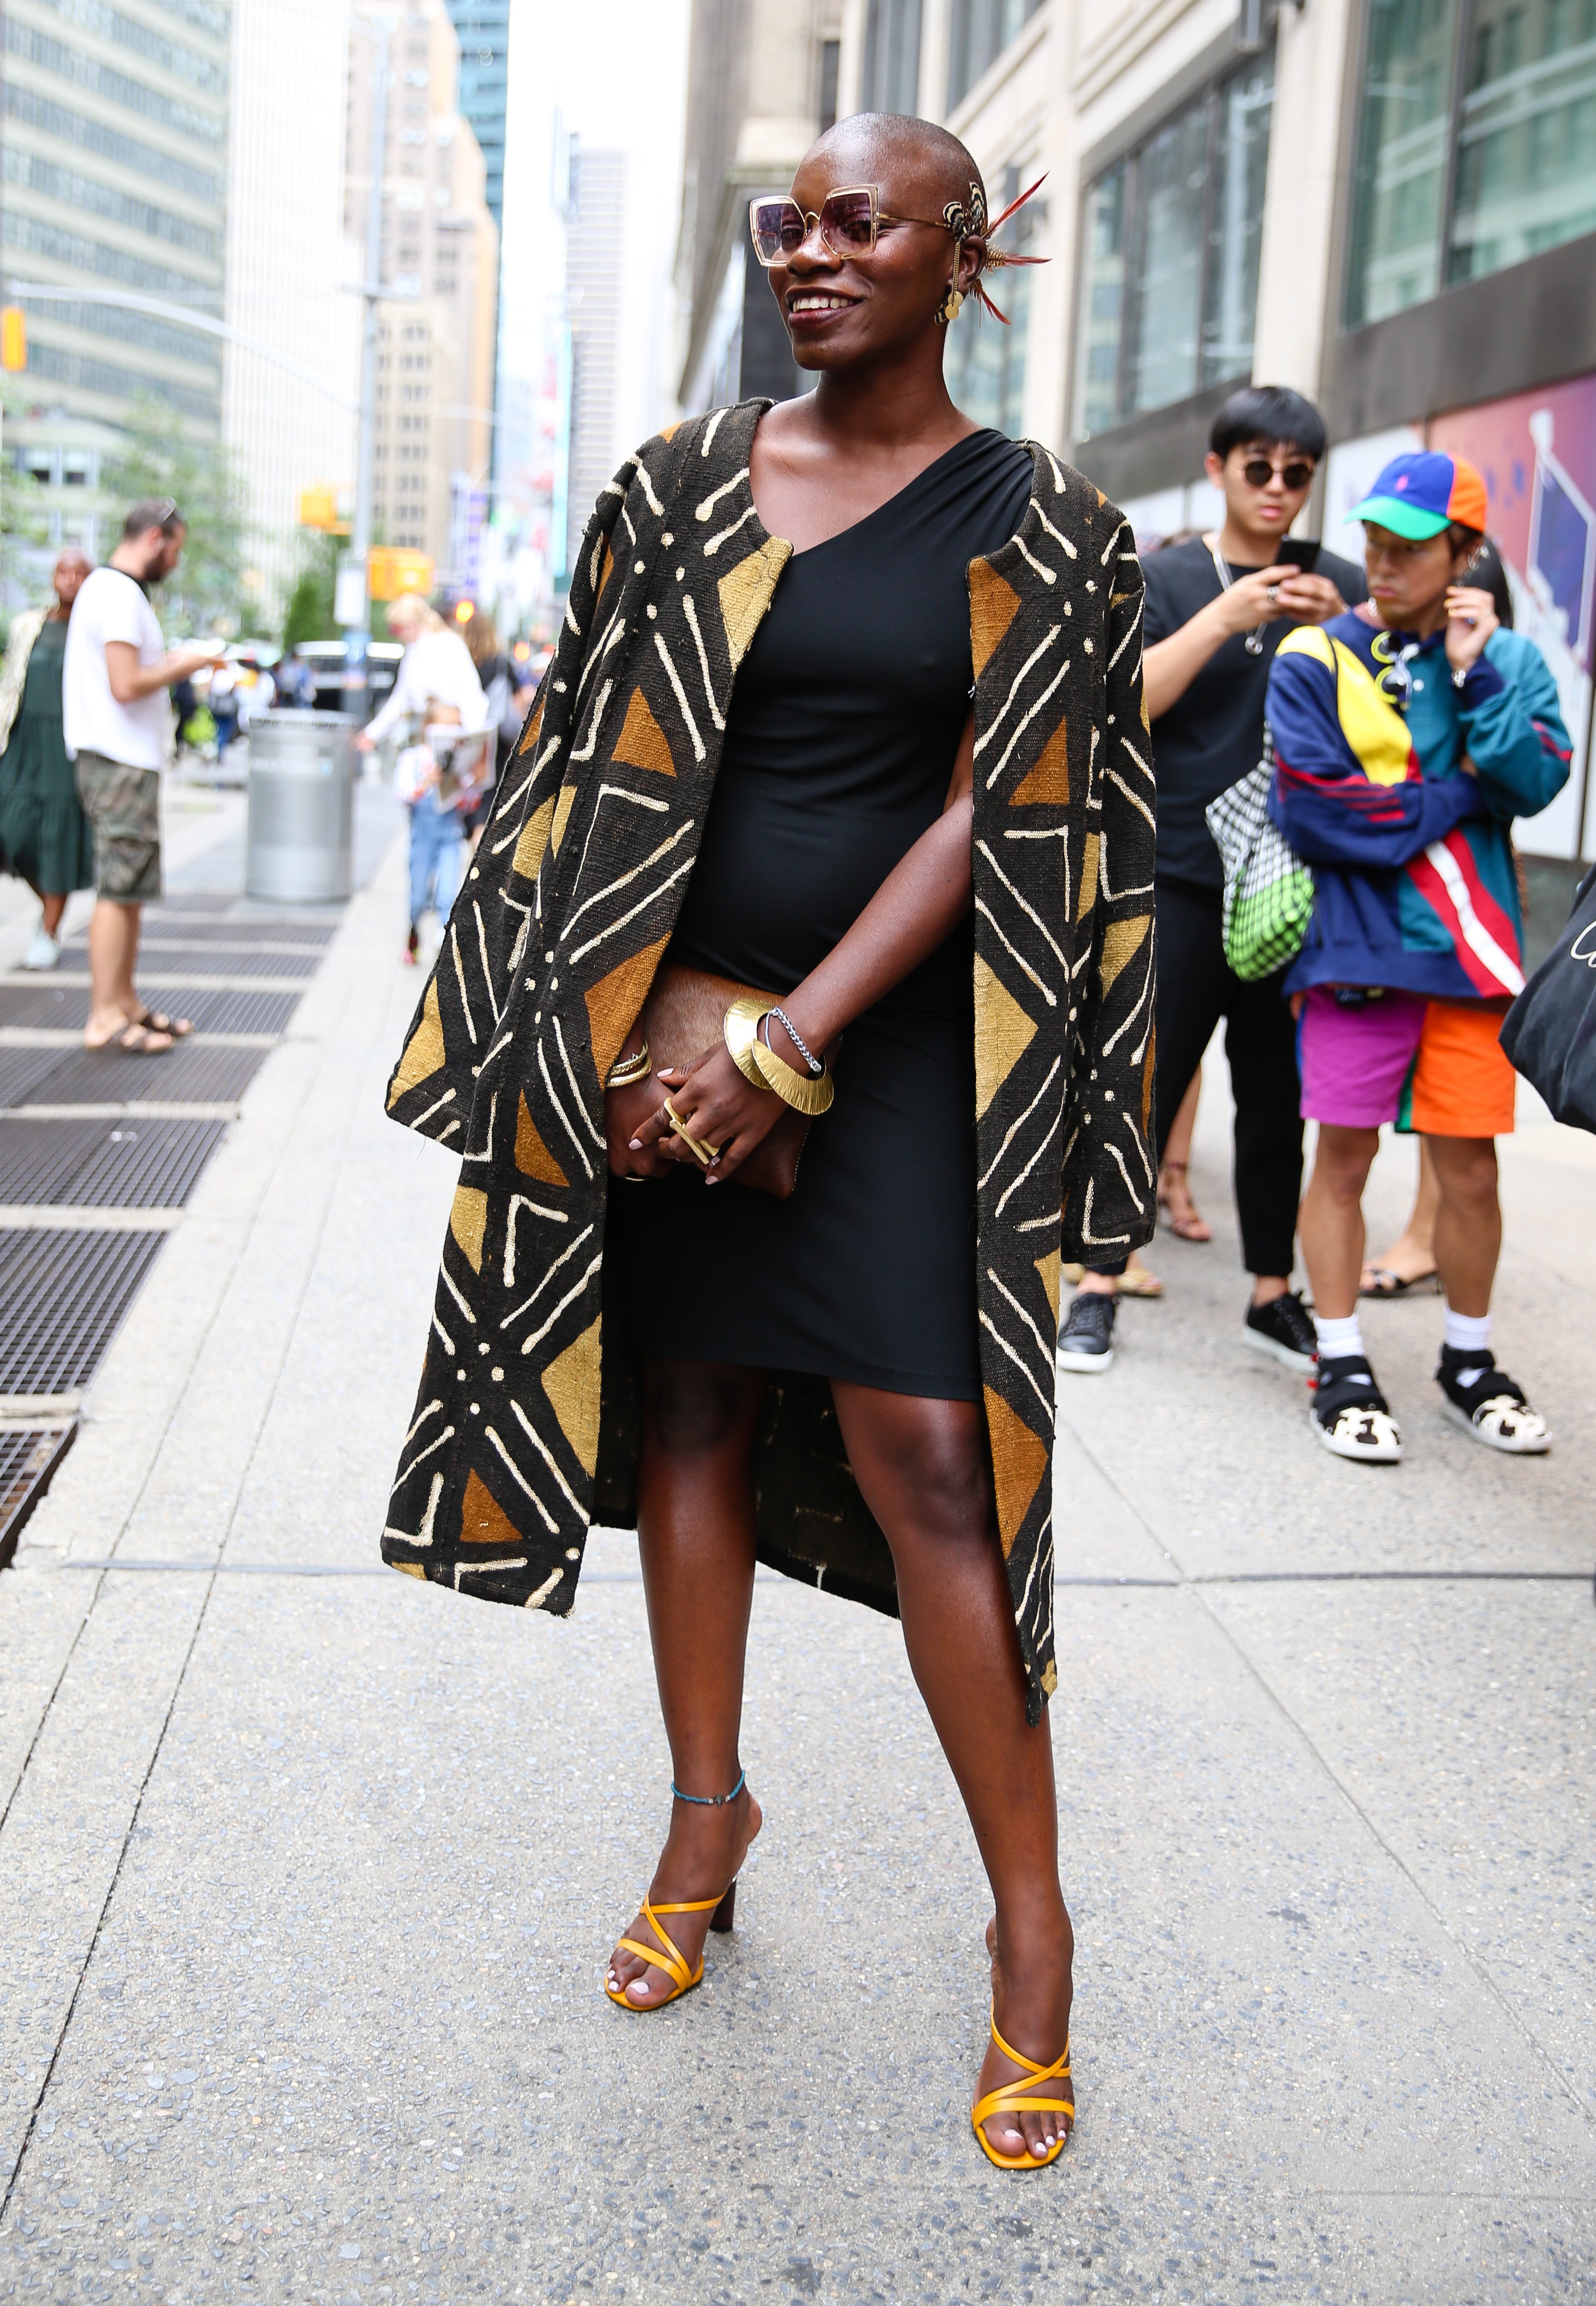 Jessica Nabongo during New York Fashion Week 2019. | Source: Getty Images